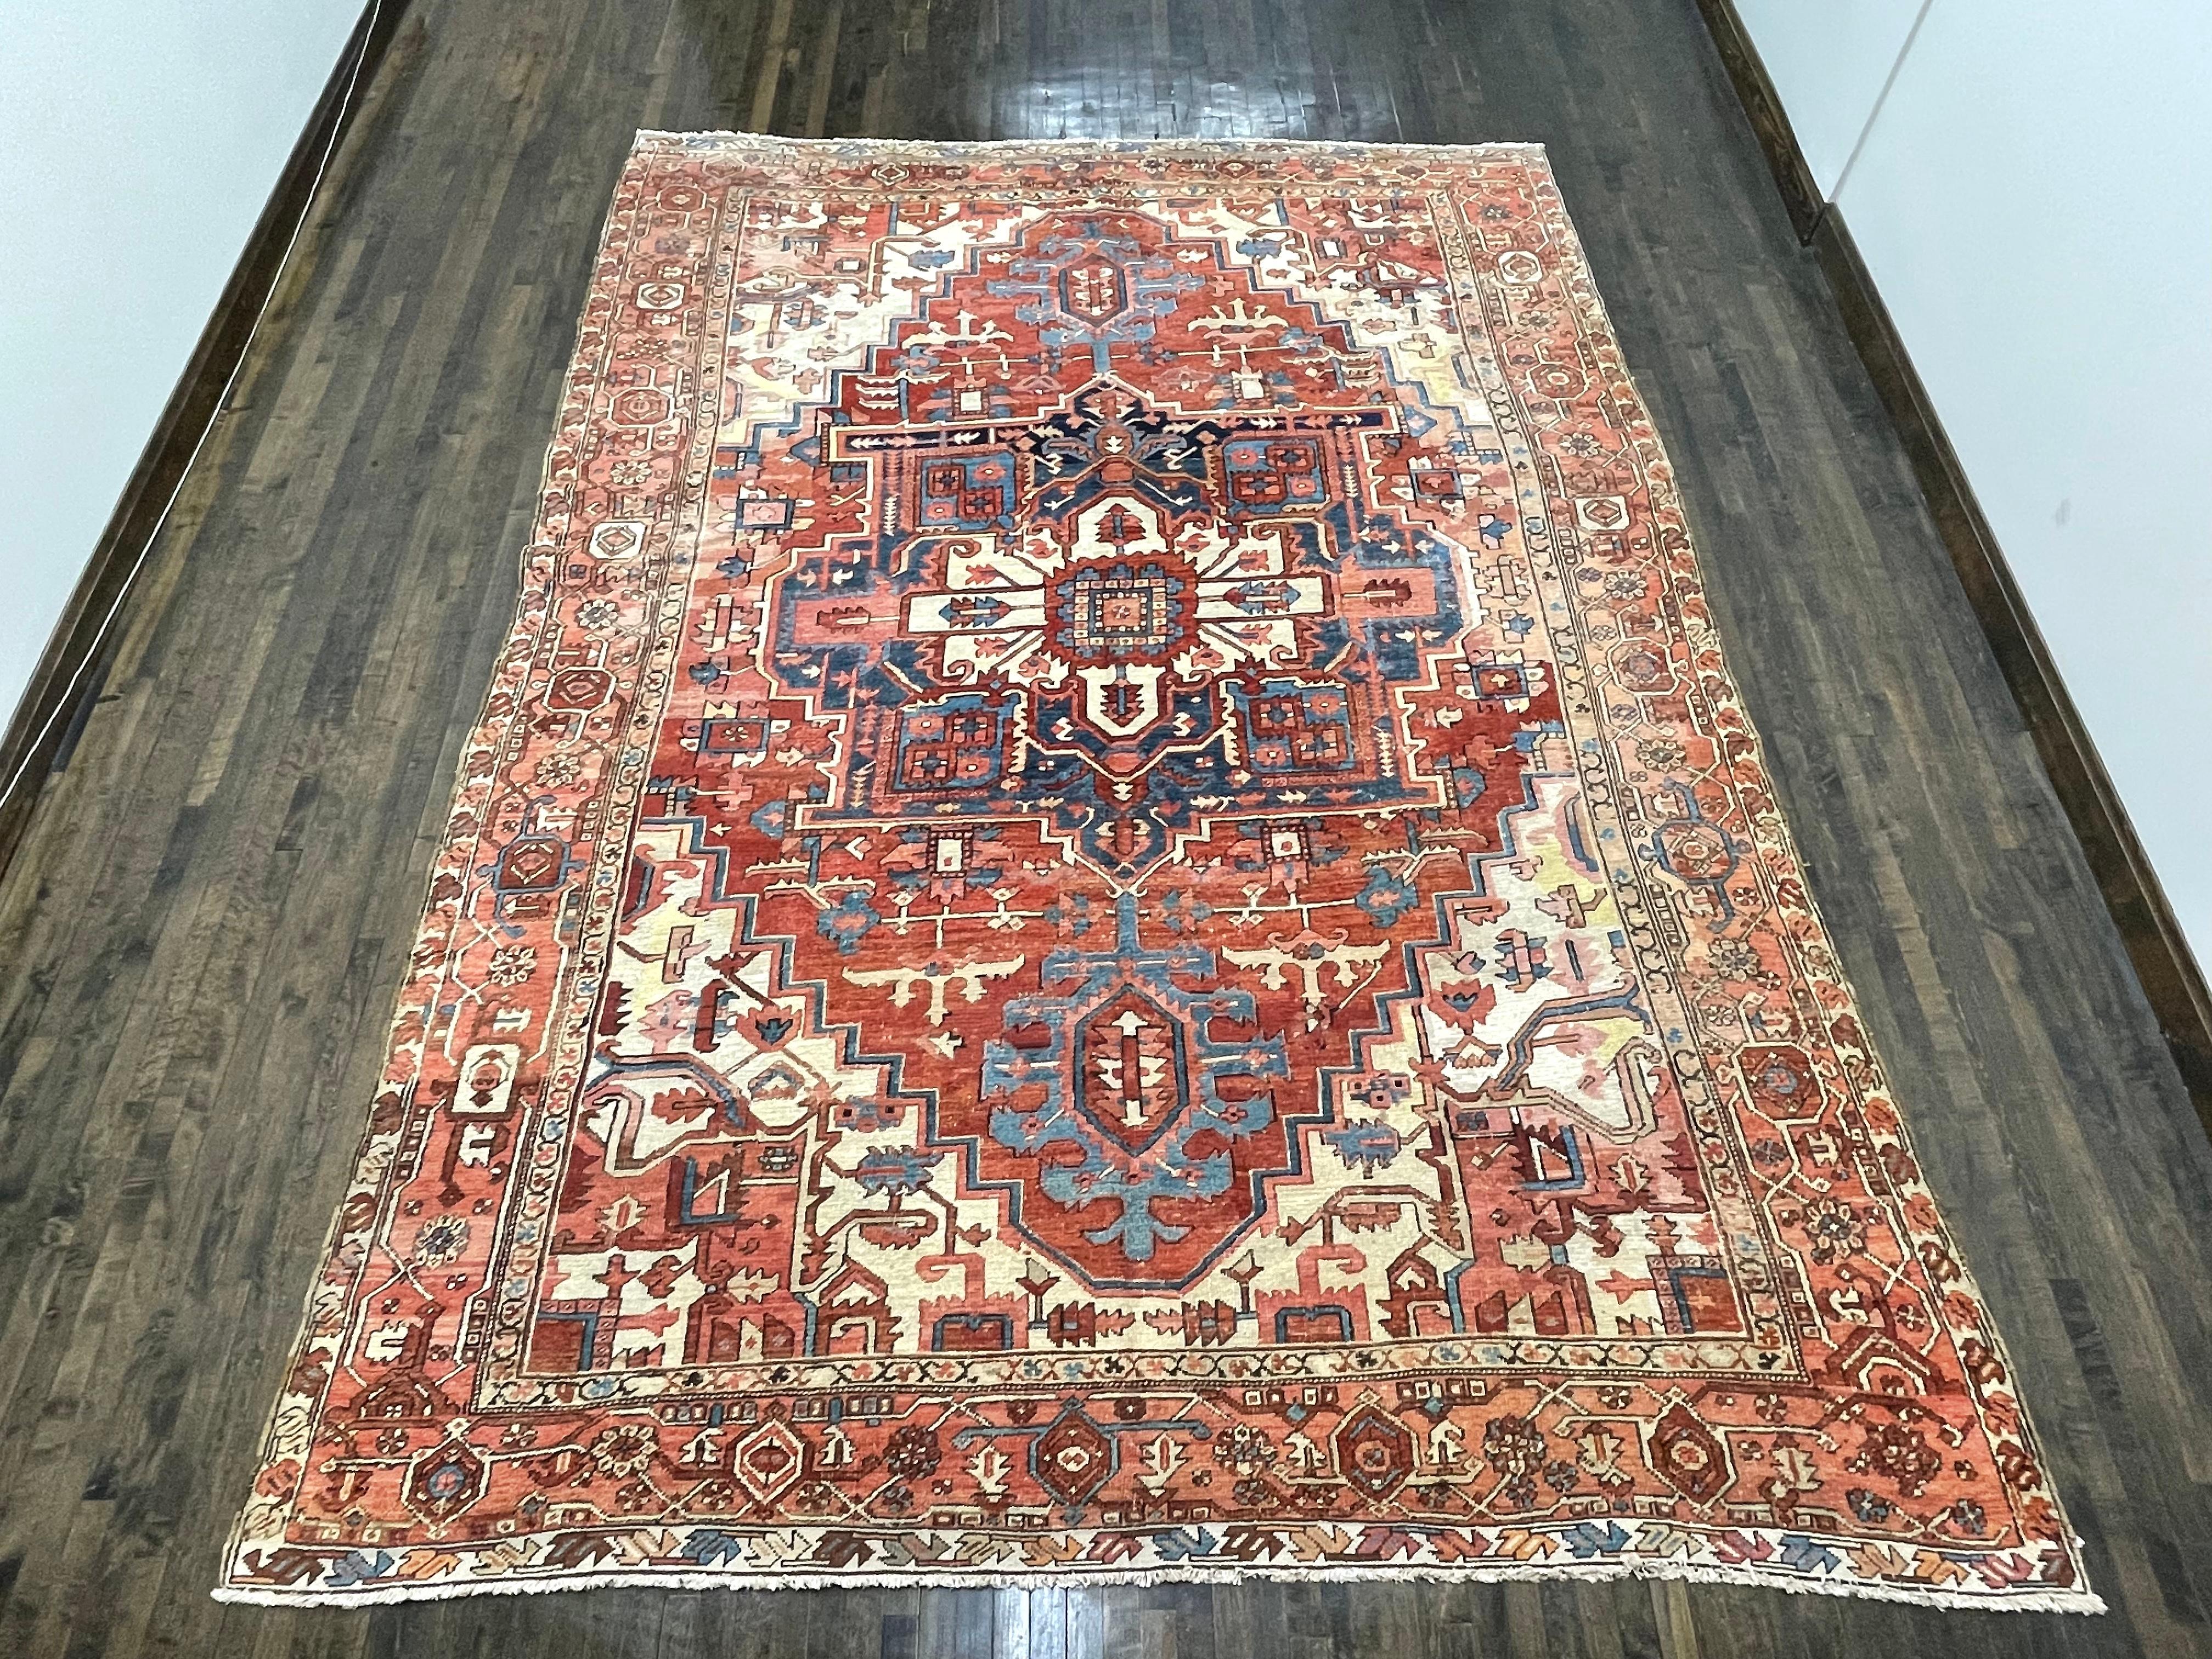 This carpet was hand woven in area know as Serapi/Heriz located in north west Iran. The rug has a huge cruciform medallion surrounded by simple angular vines and spandrels within a crab border. The salmon/rust field has a wonderful patina that age